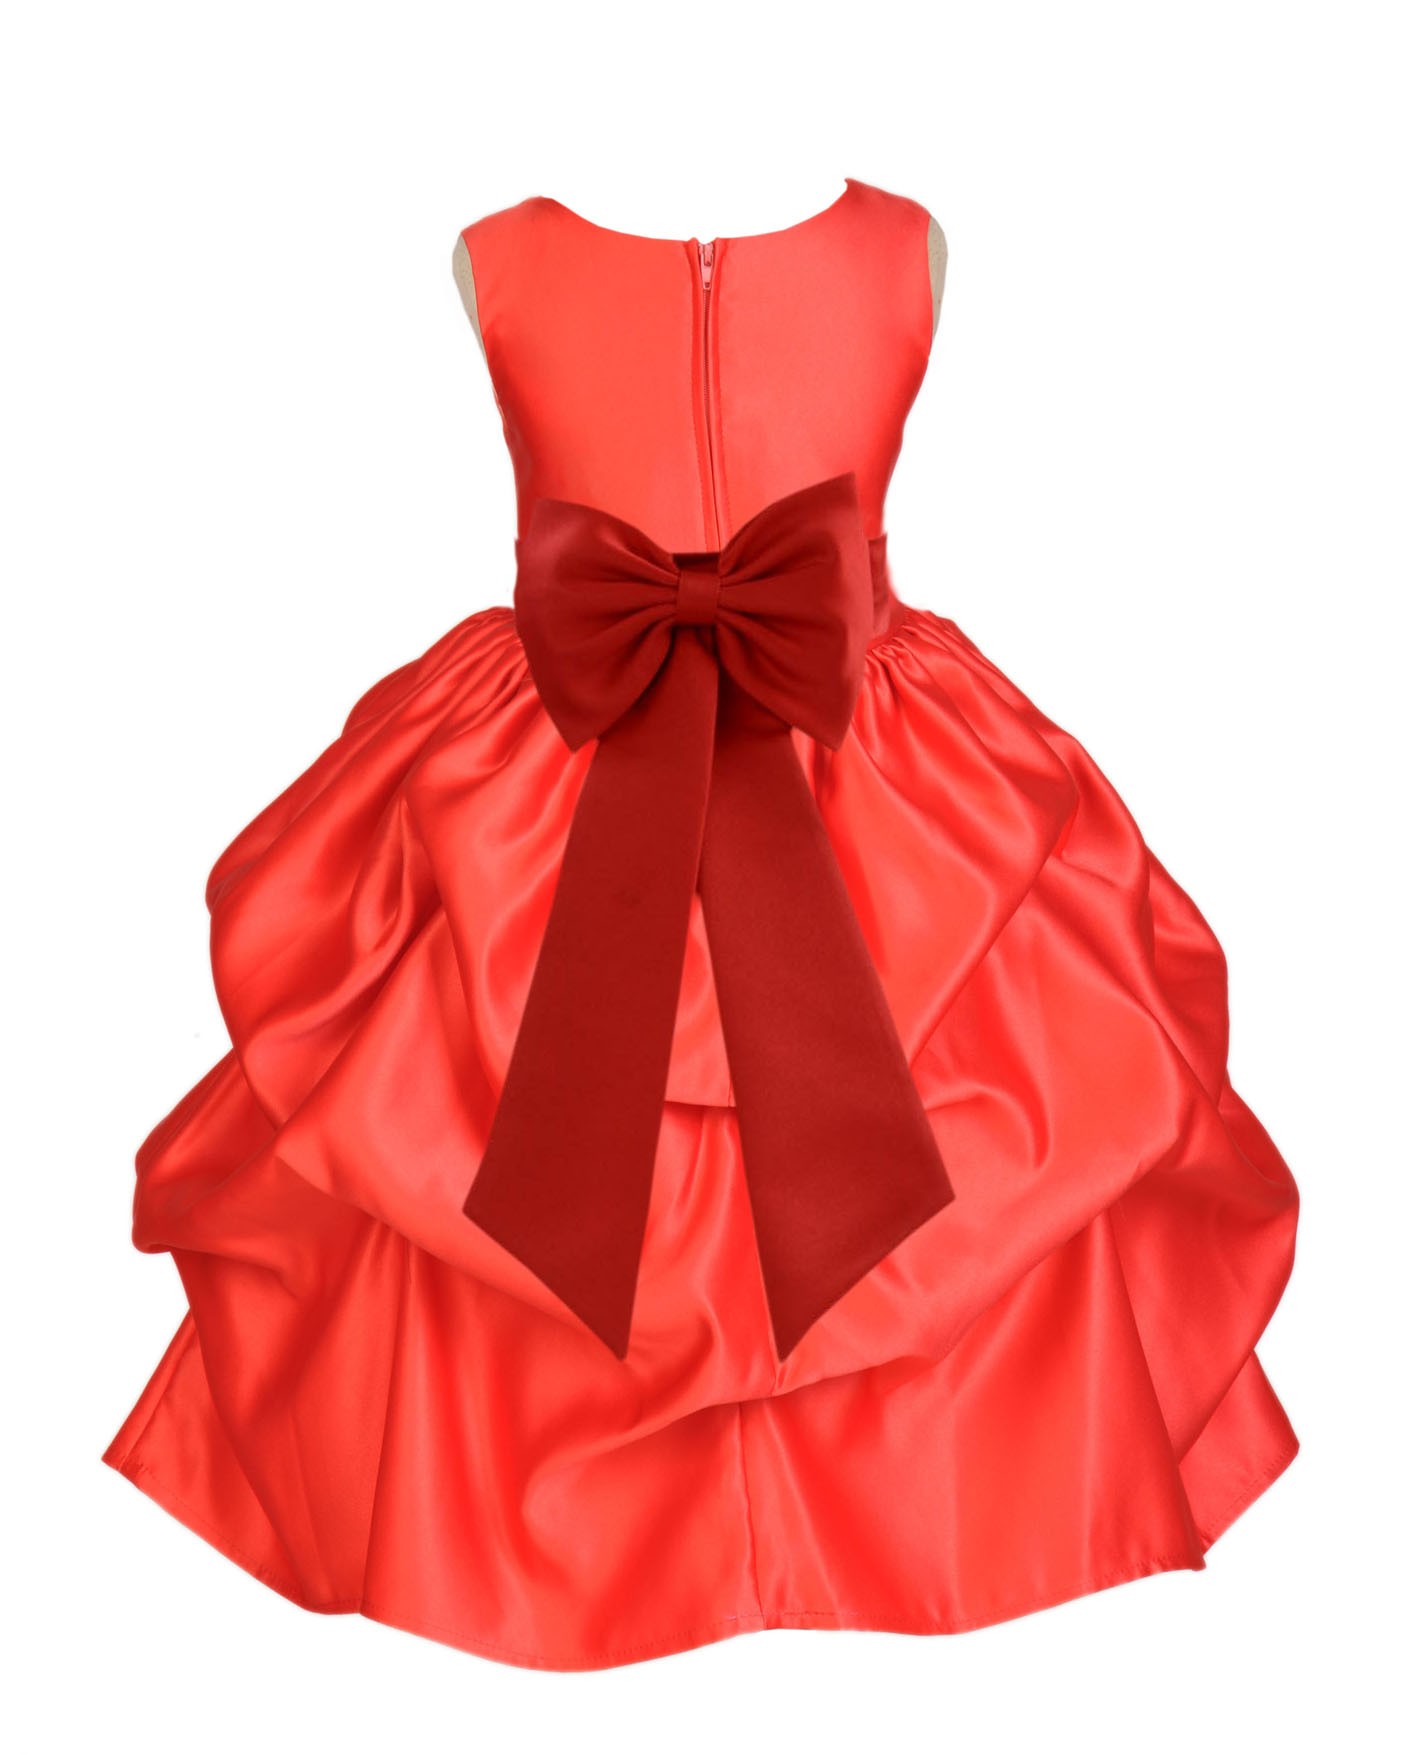 Red/Permission Satin Pick-Up Flower Girl Dress Christmas 208T